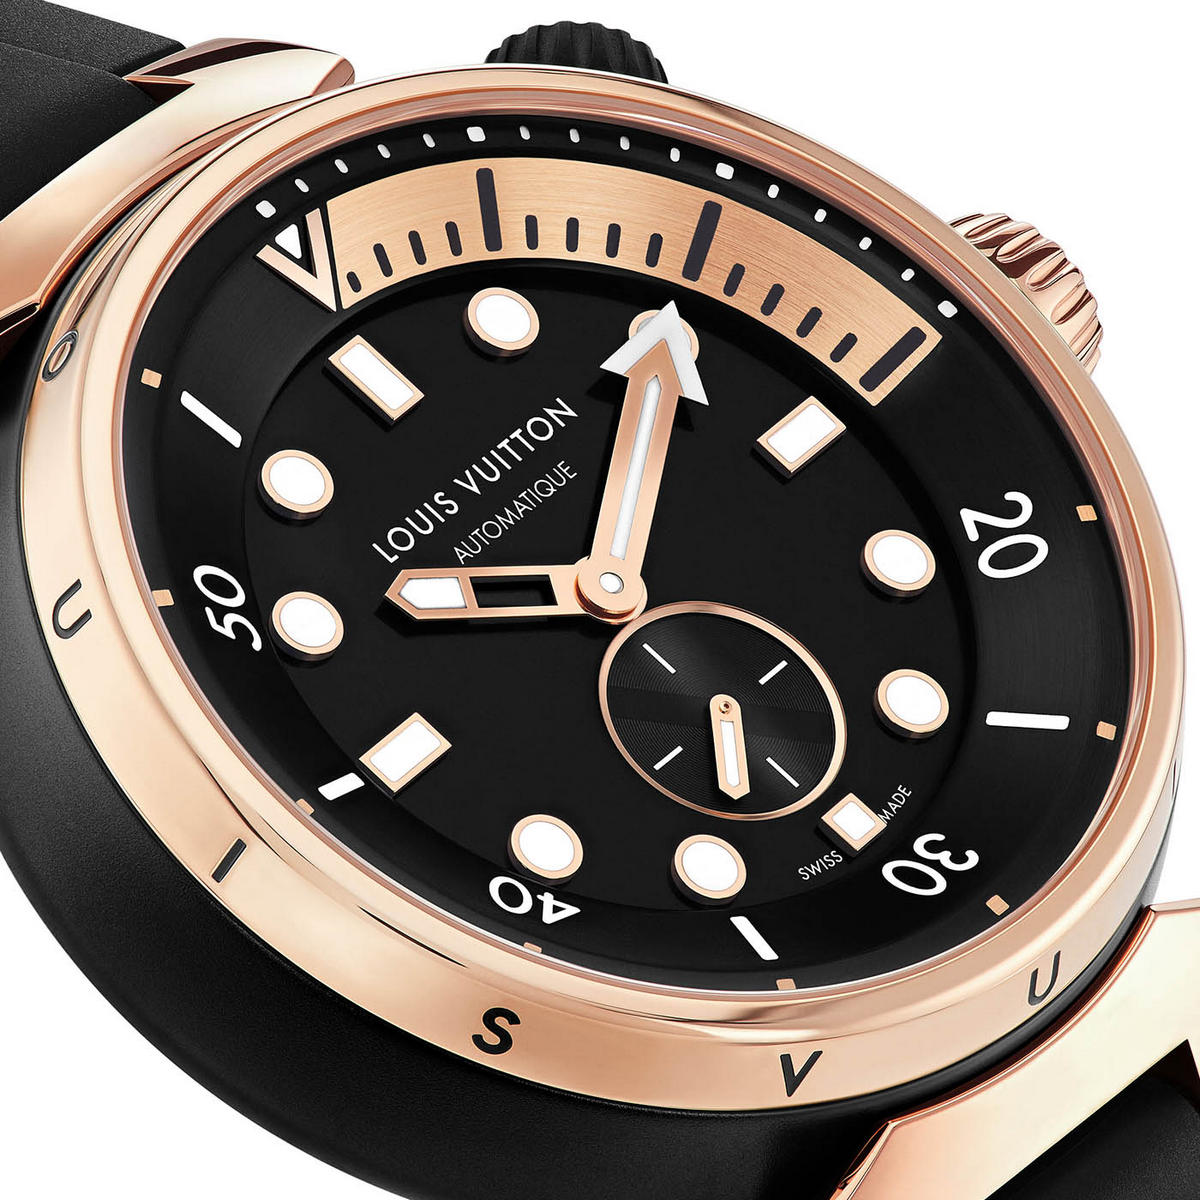 Louis Vuitton reimagines the traditional dive watch design with